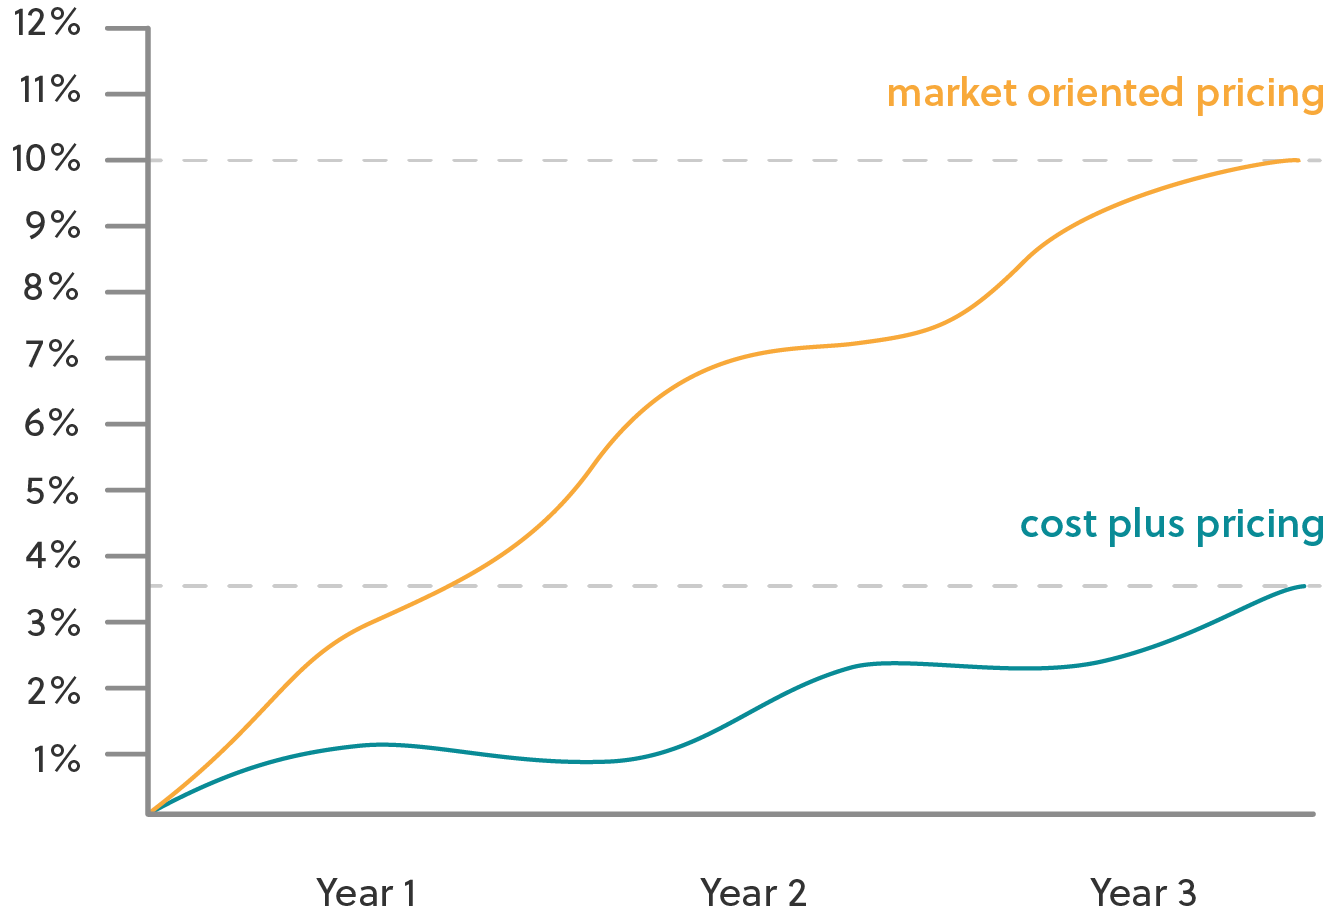 Market-oriented pricing vs. cost-plus pricing